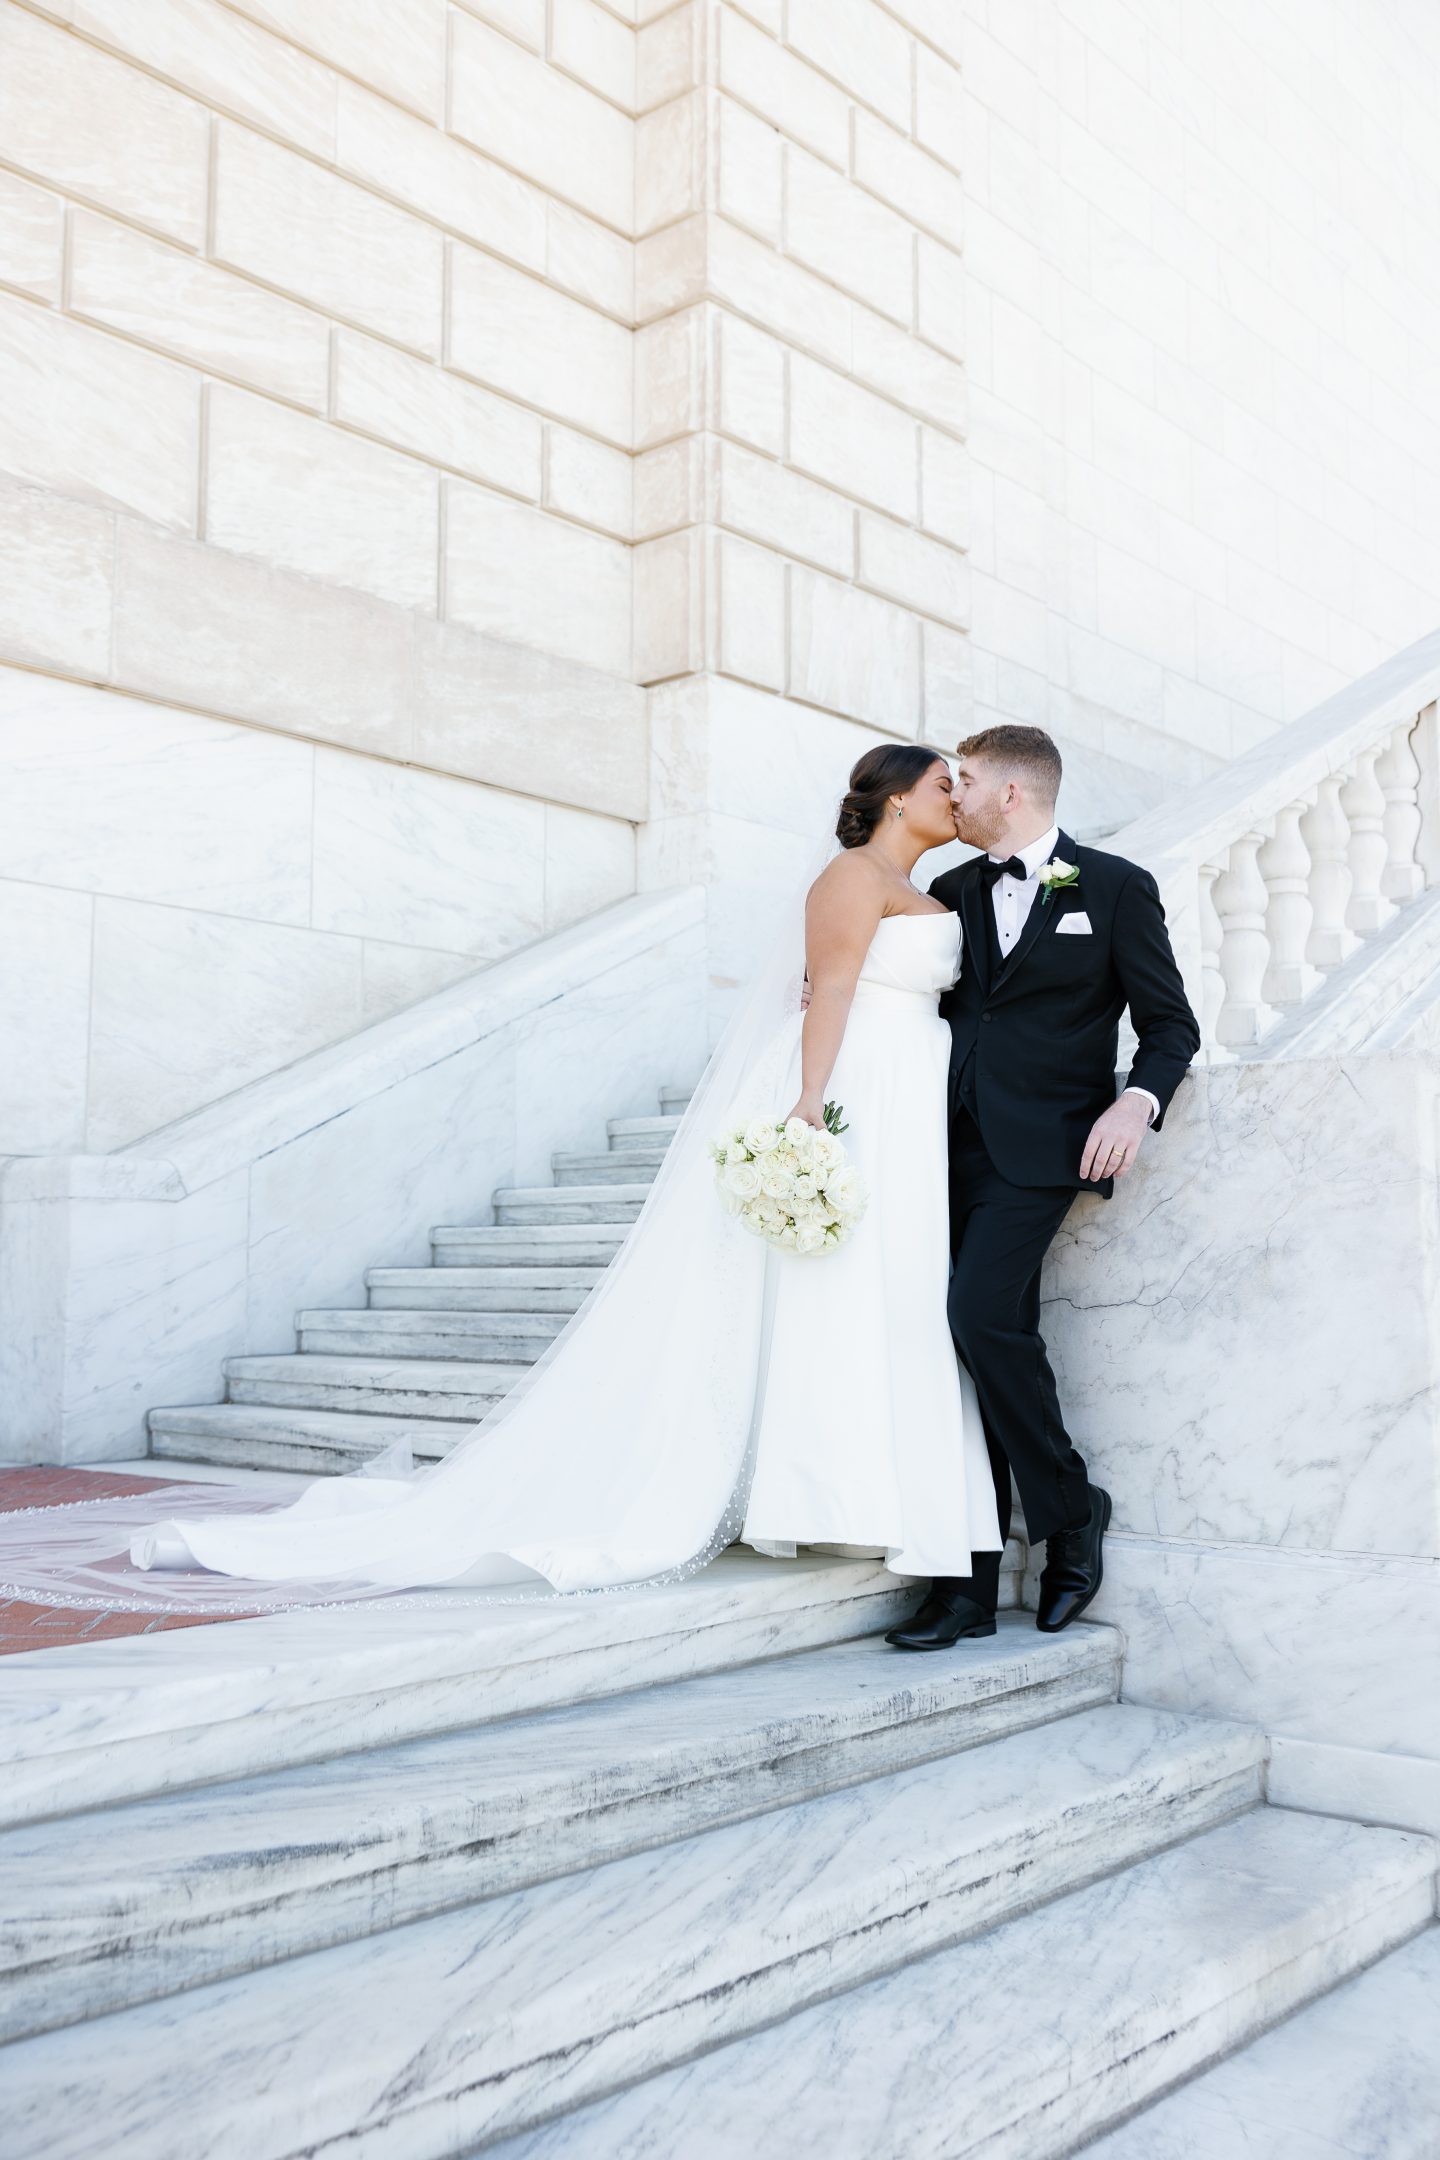 Bride and groom at The DIA for their wedding photos